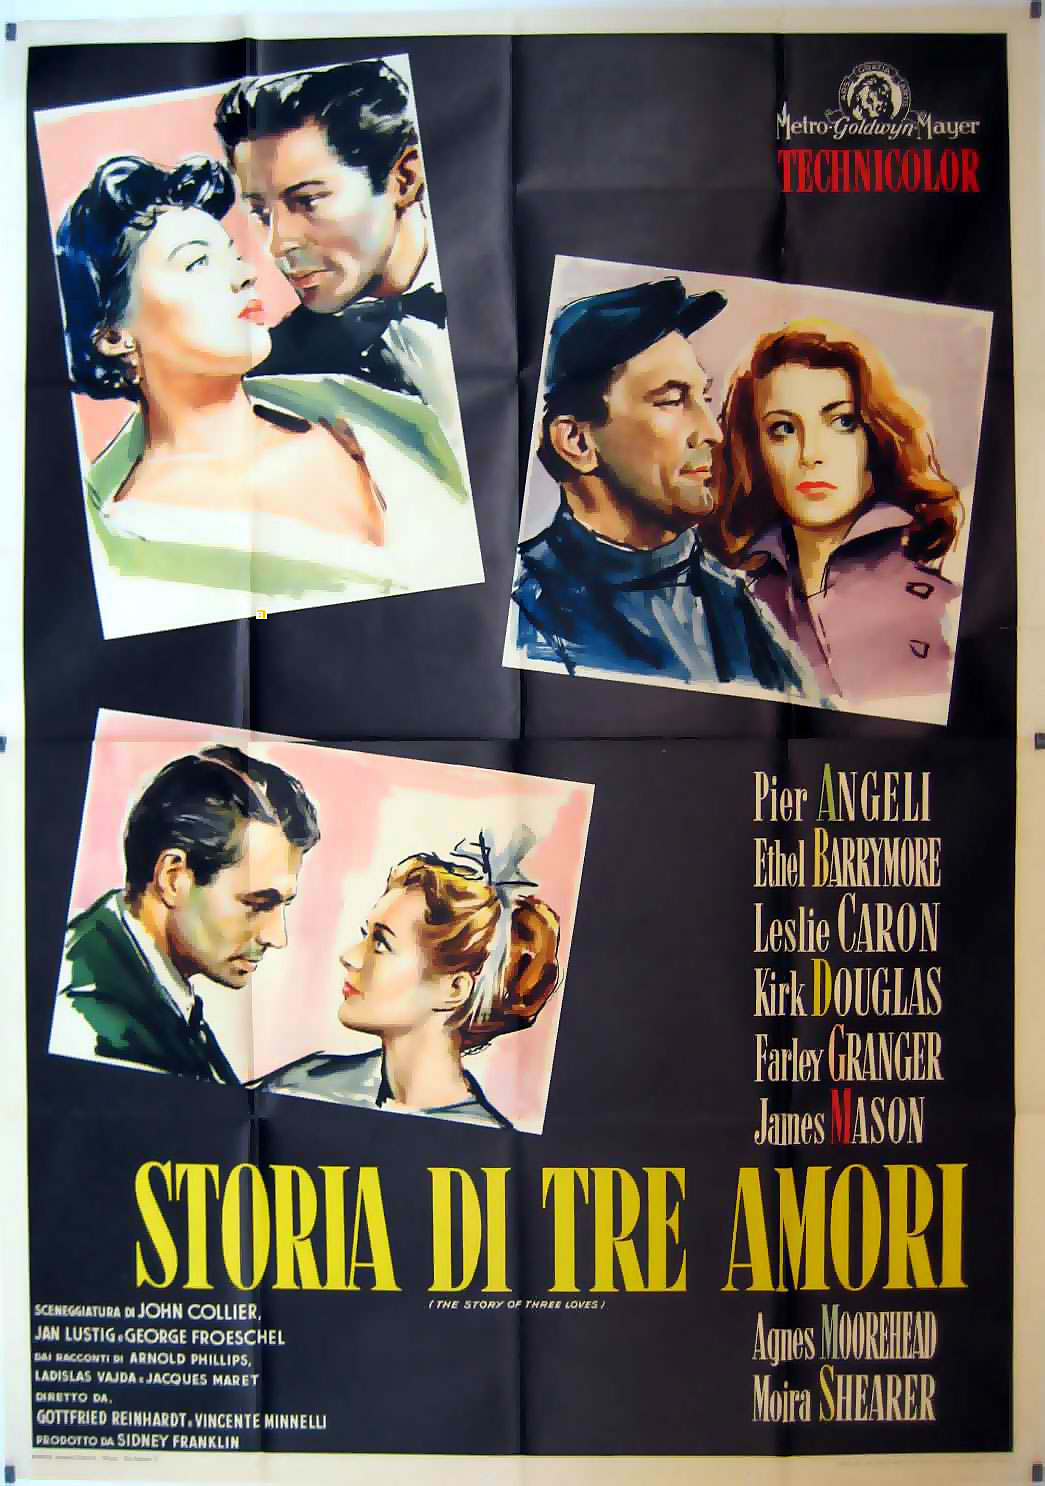 Historia De Tres Amores Movie Poster The Story Of Three Loves Movie Poster